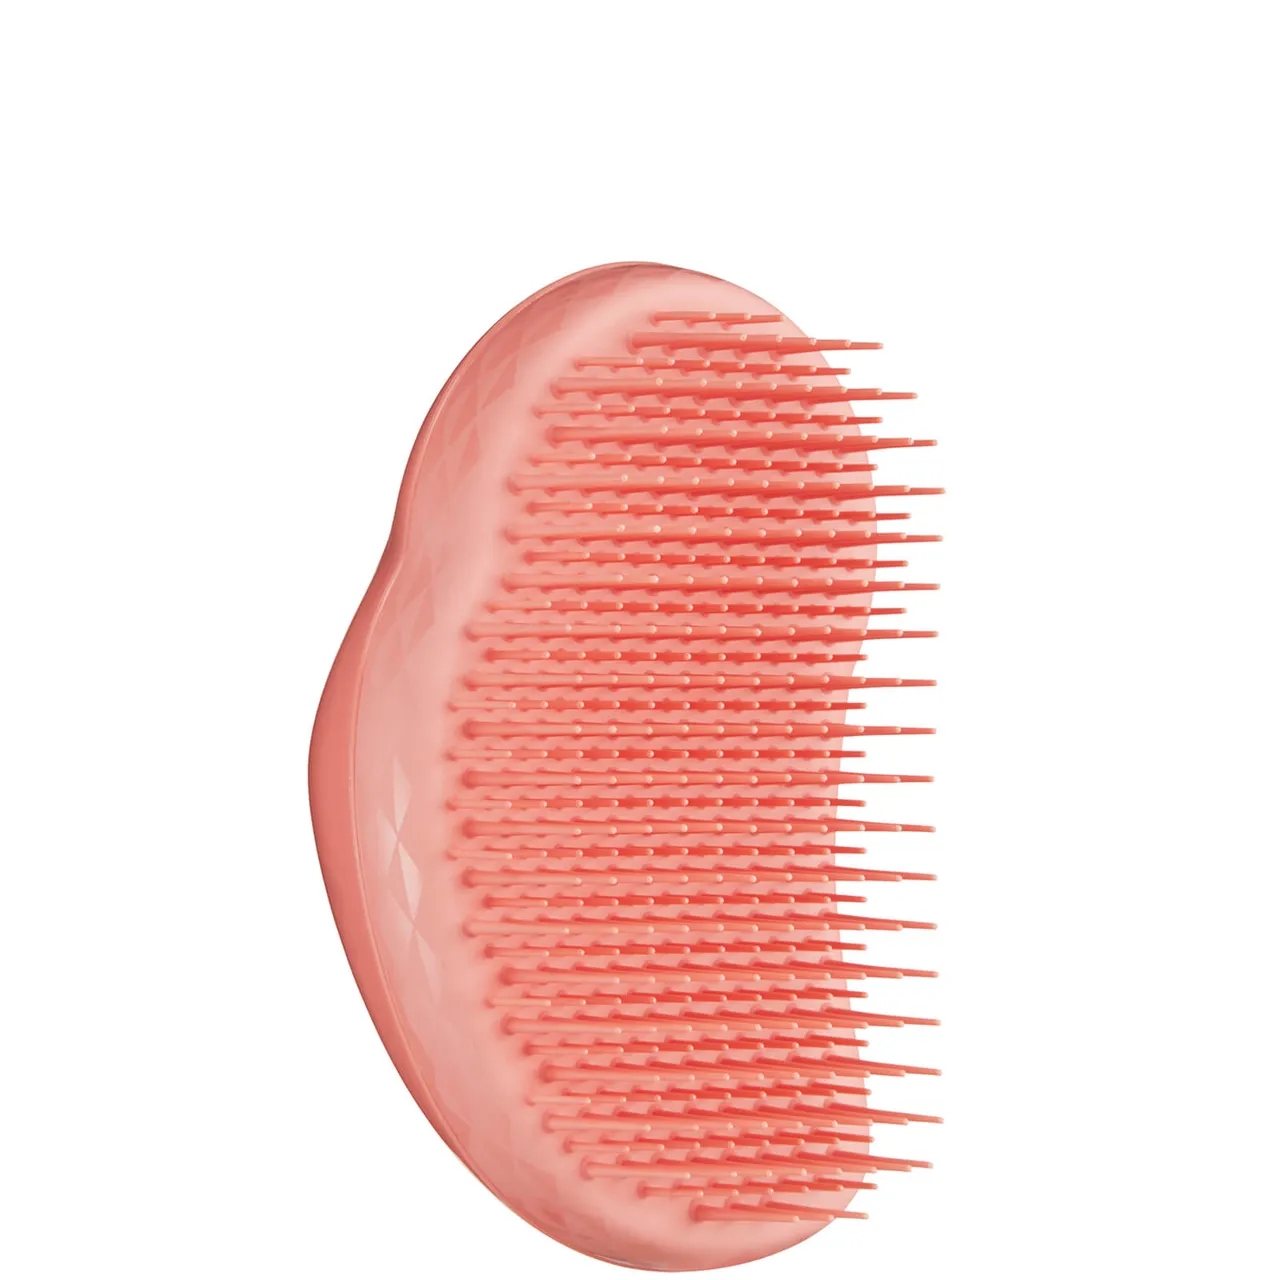 Tangle Teezer The Original Thick and Curly Brush - Terracotta